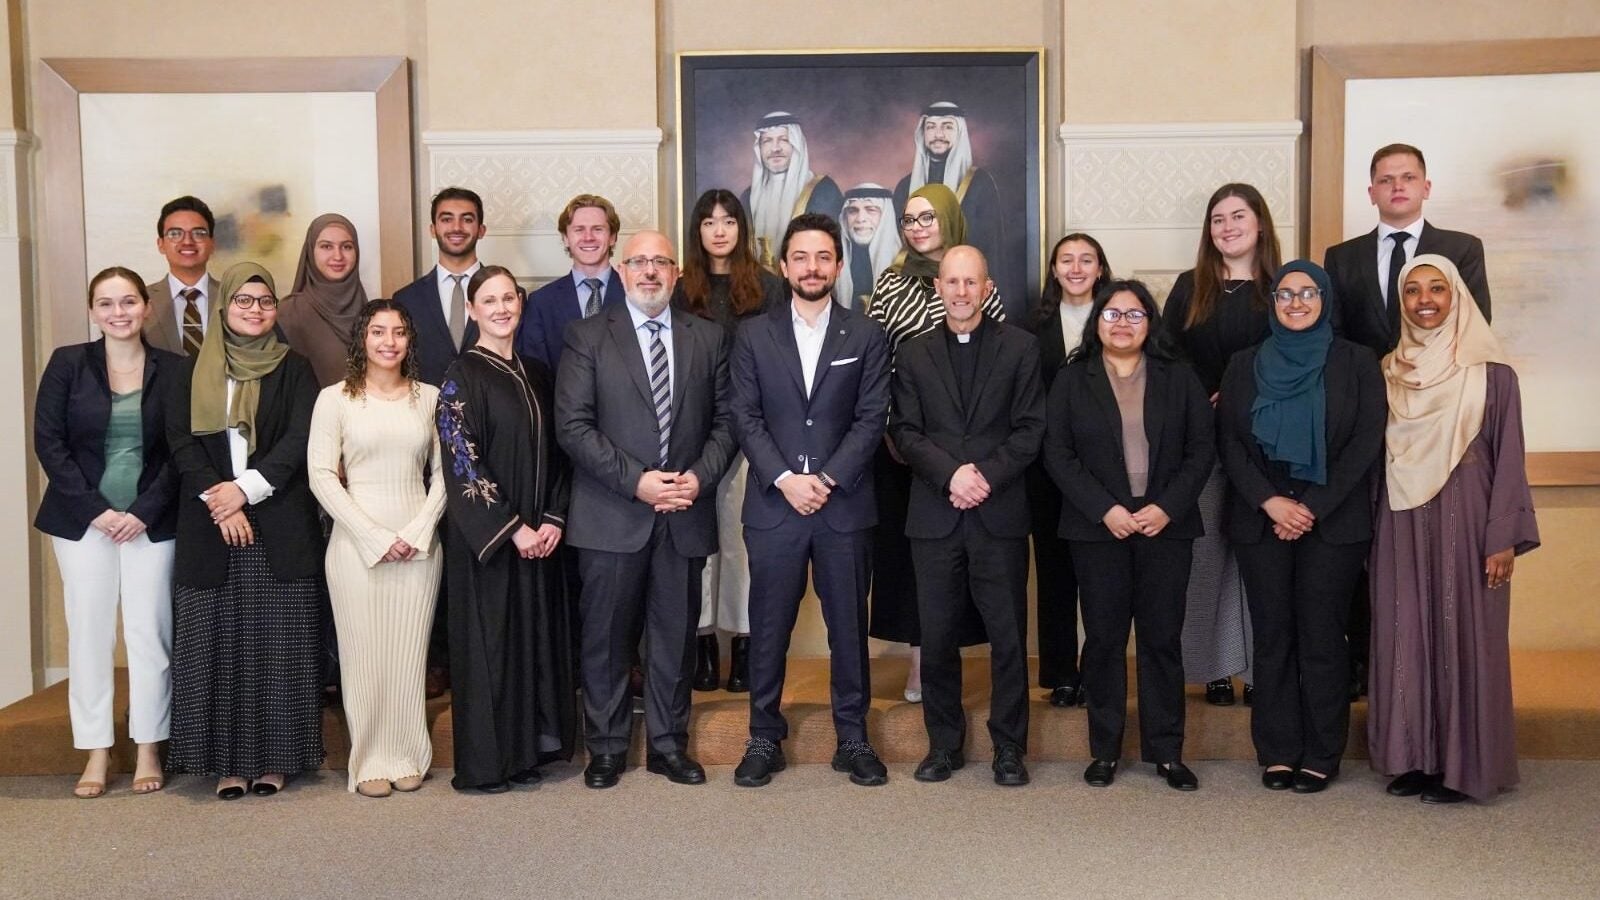 His Royal Highness Crown Prince Al Hussein bin Abdullah II standing in the center between Fr. Matthew Carnes, Imam Yahya Hendi, and a group of students.